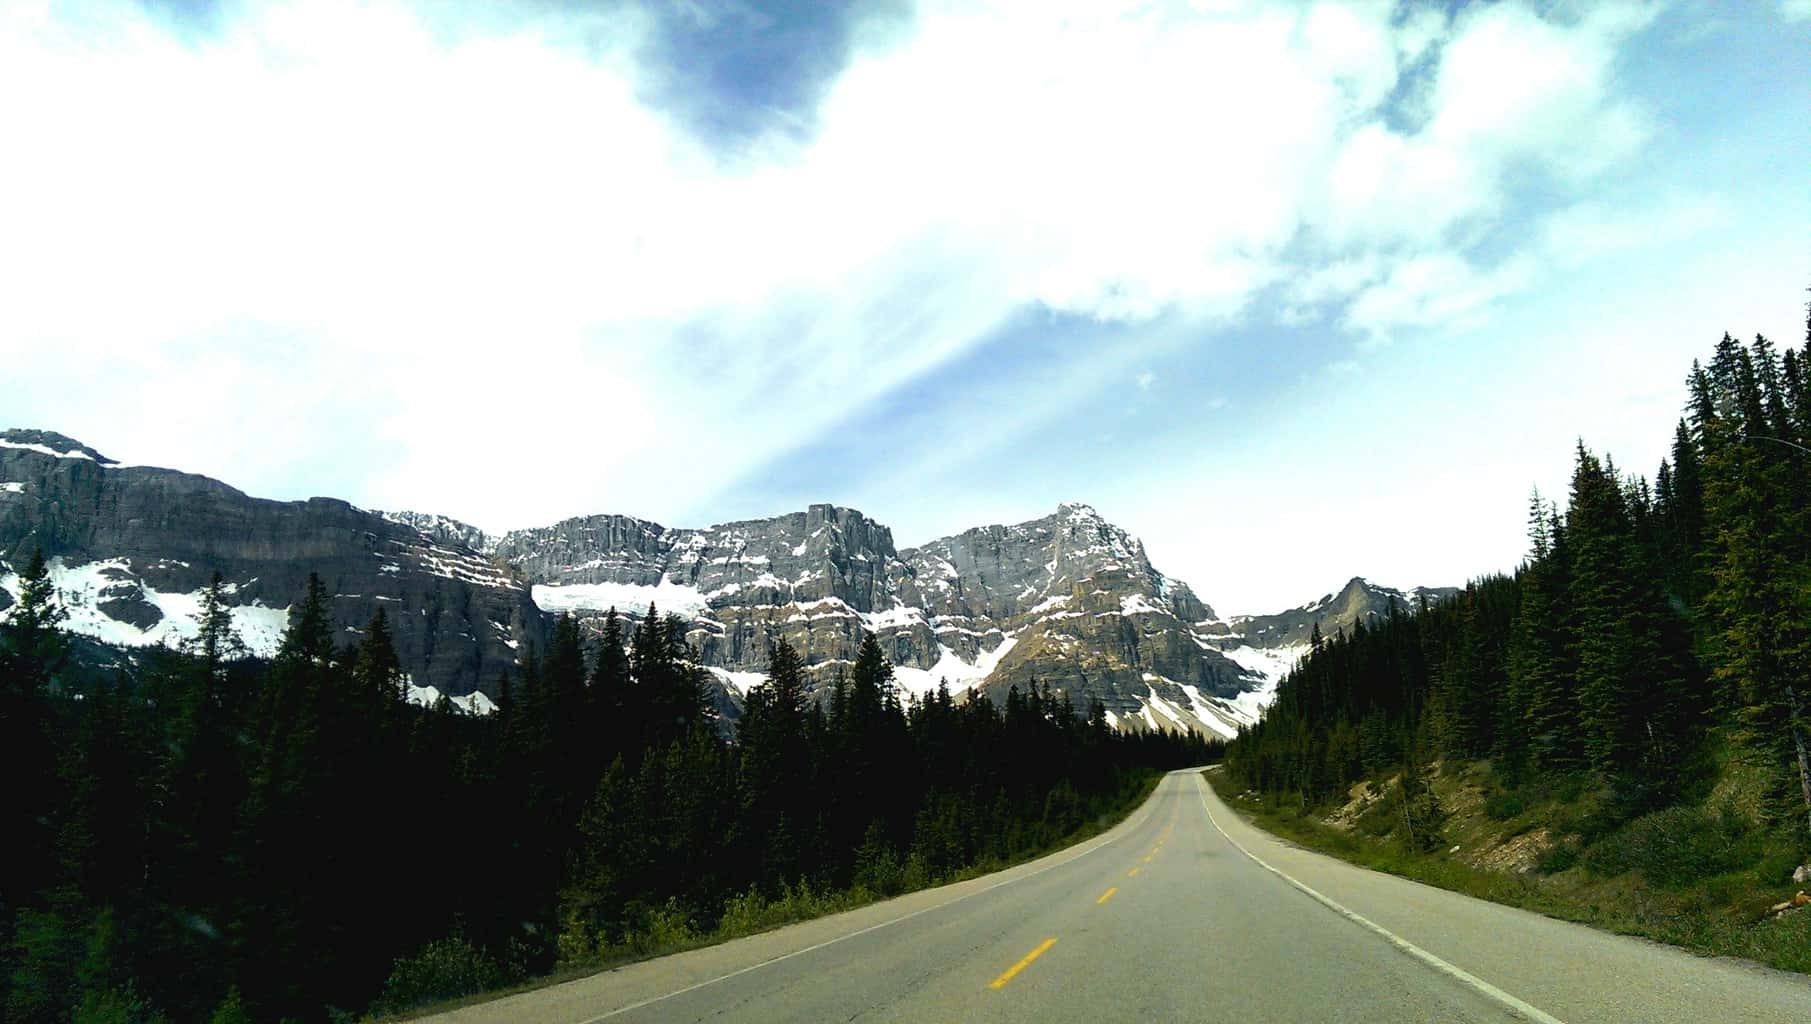 The Icefield Parkway Hwy 93